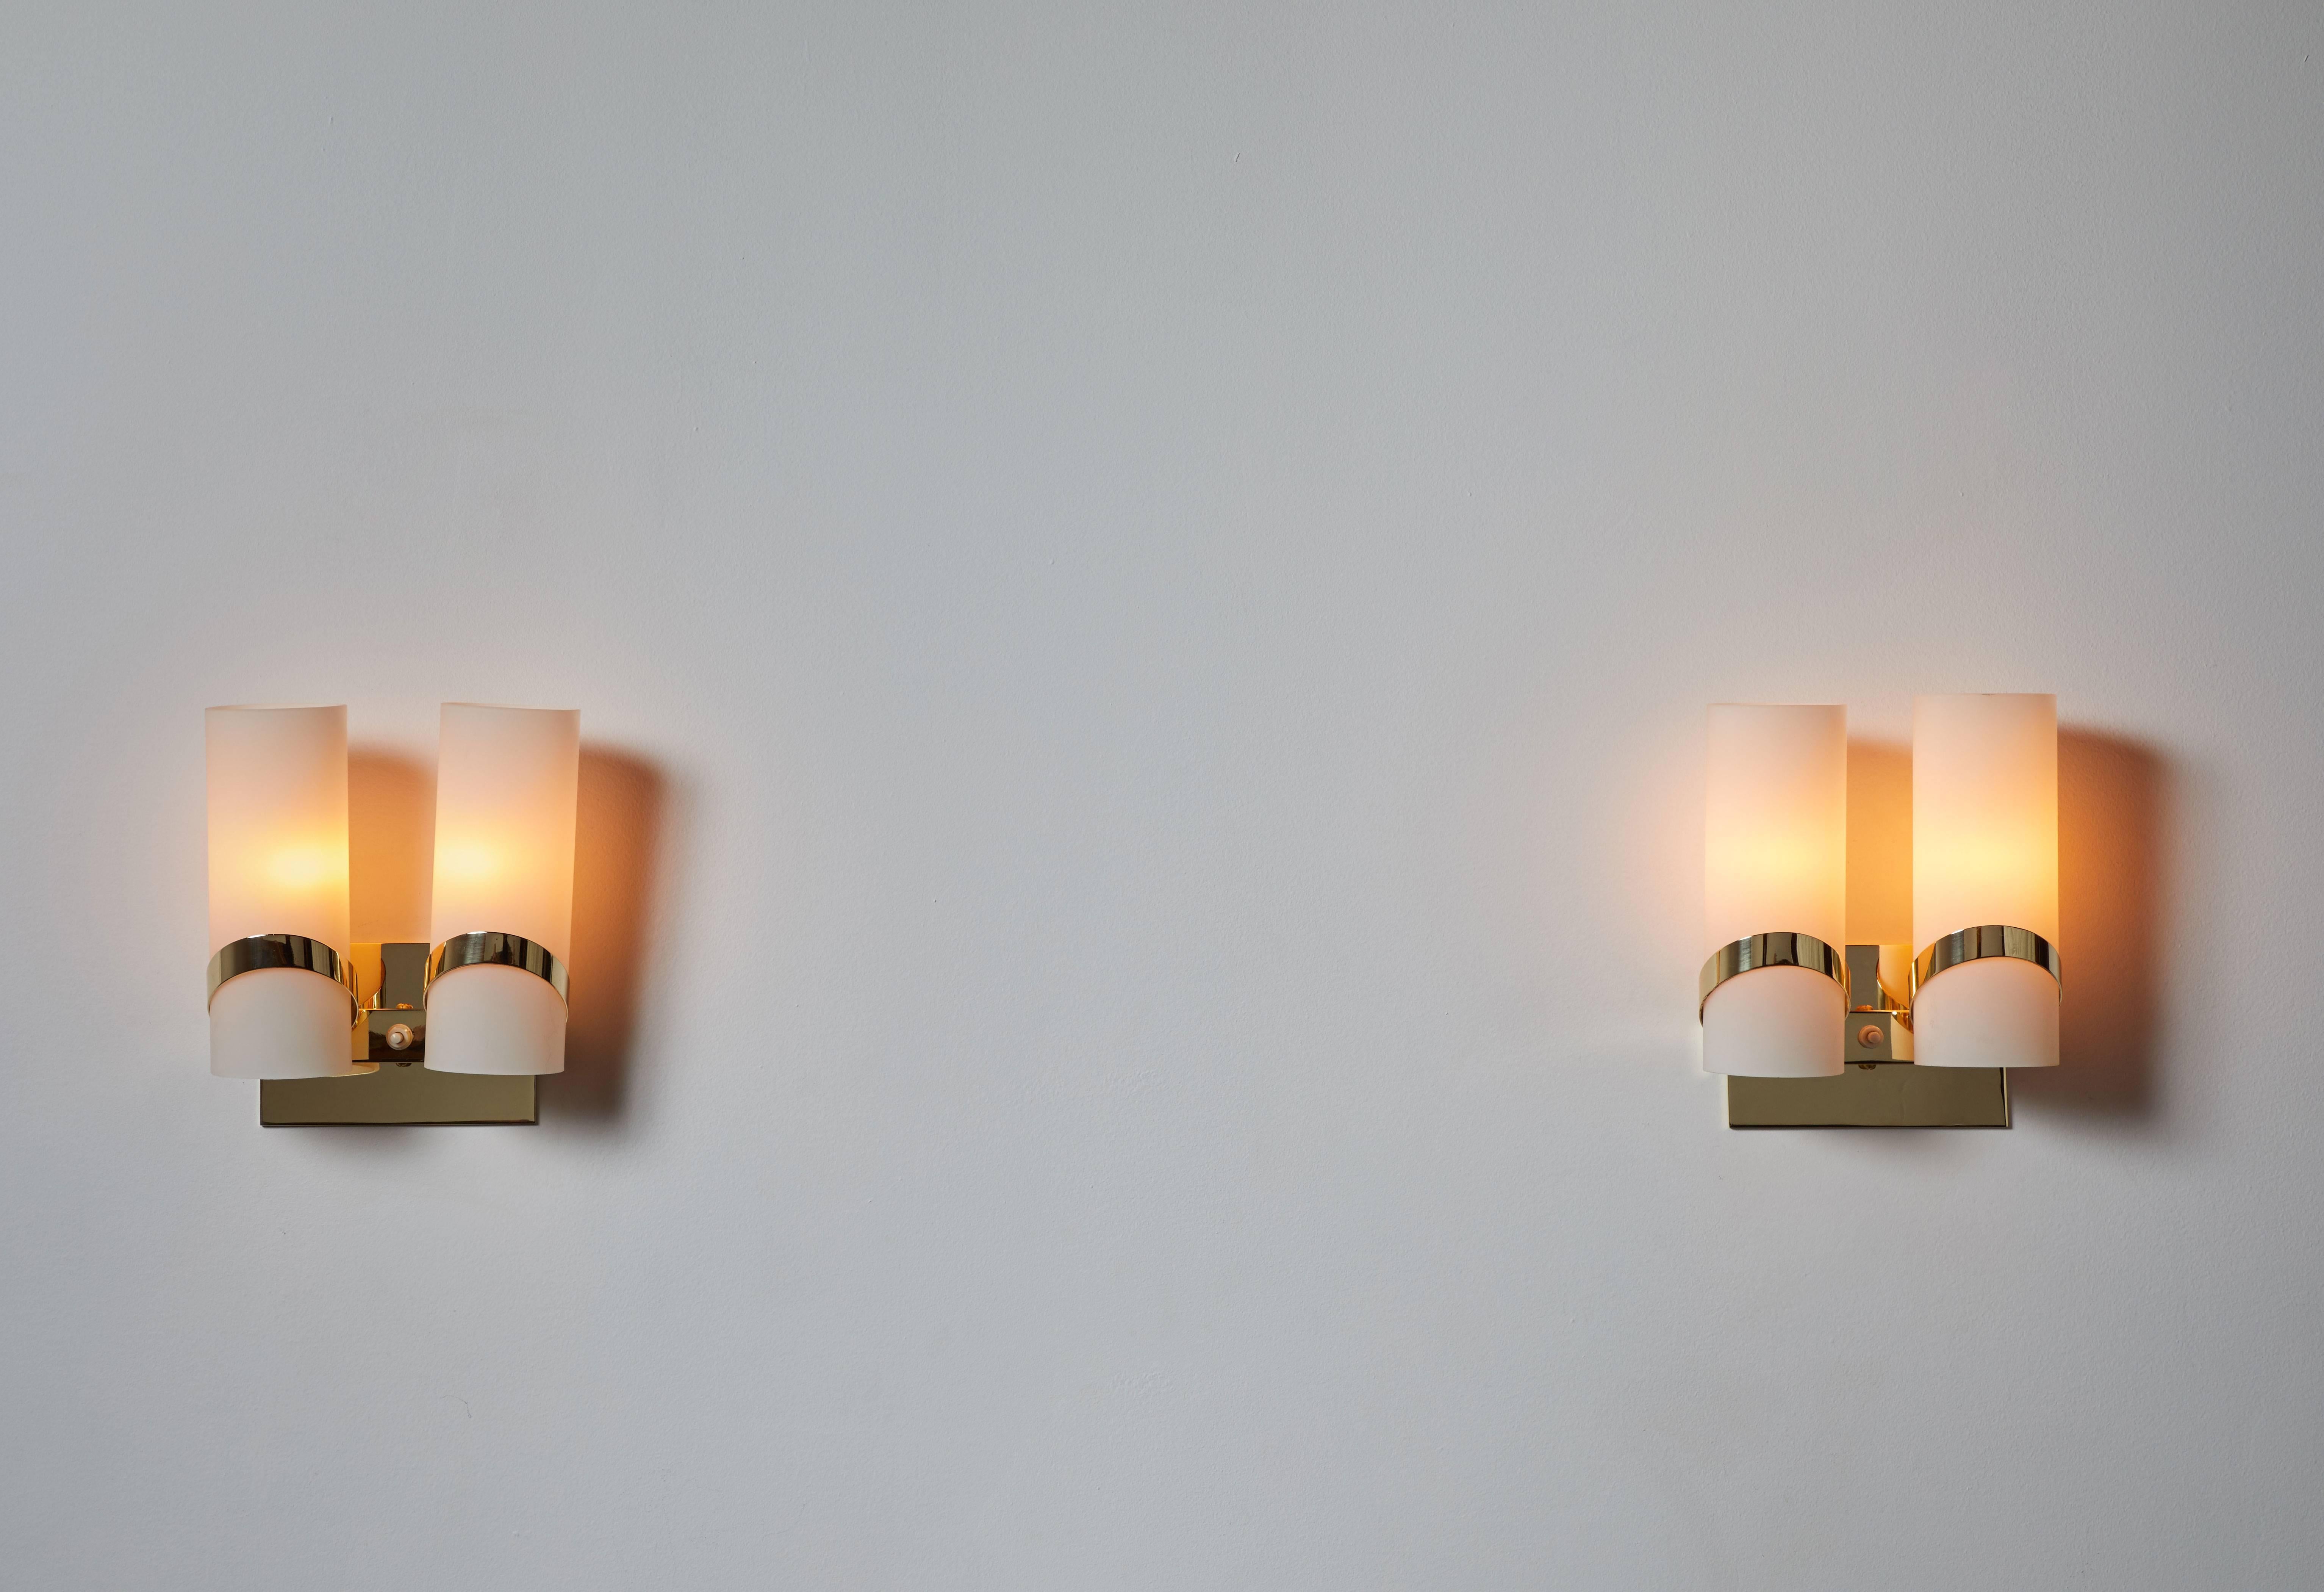 Pair of sconces designed in Italy, circa 1960s. Brass and brushed satin glass. Wired for US junction boxes. Each light takes one E27 100w maximum bulb. Brass has been fully restored and polished.